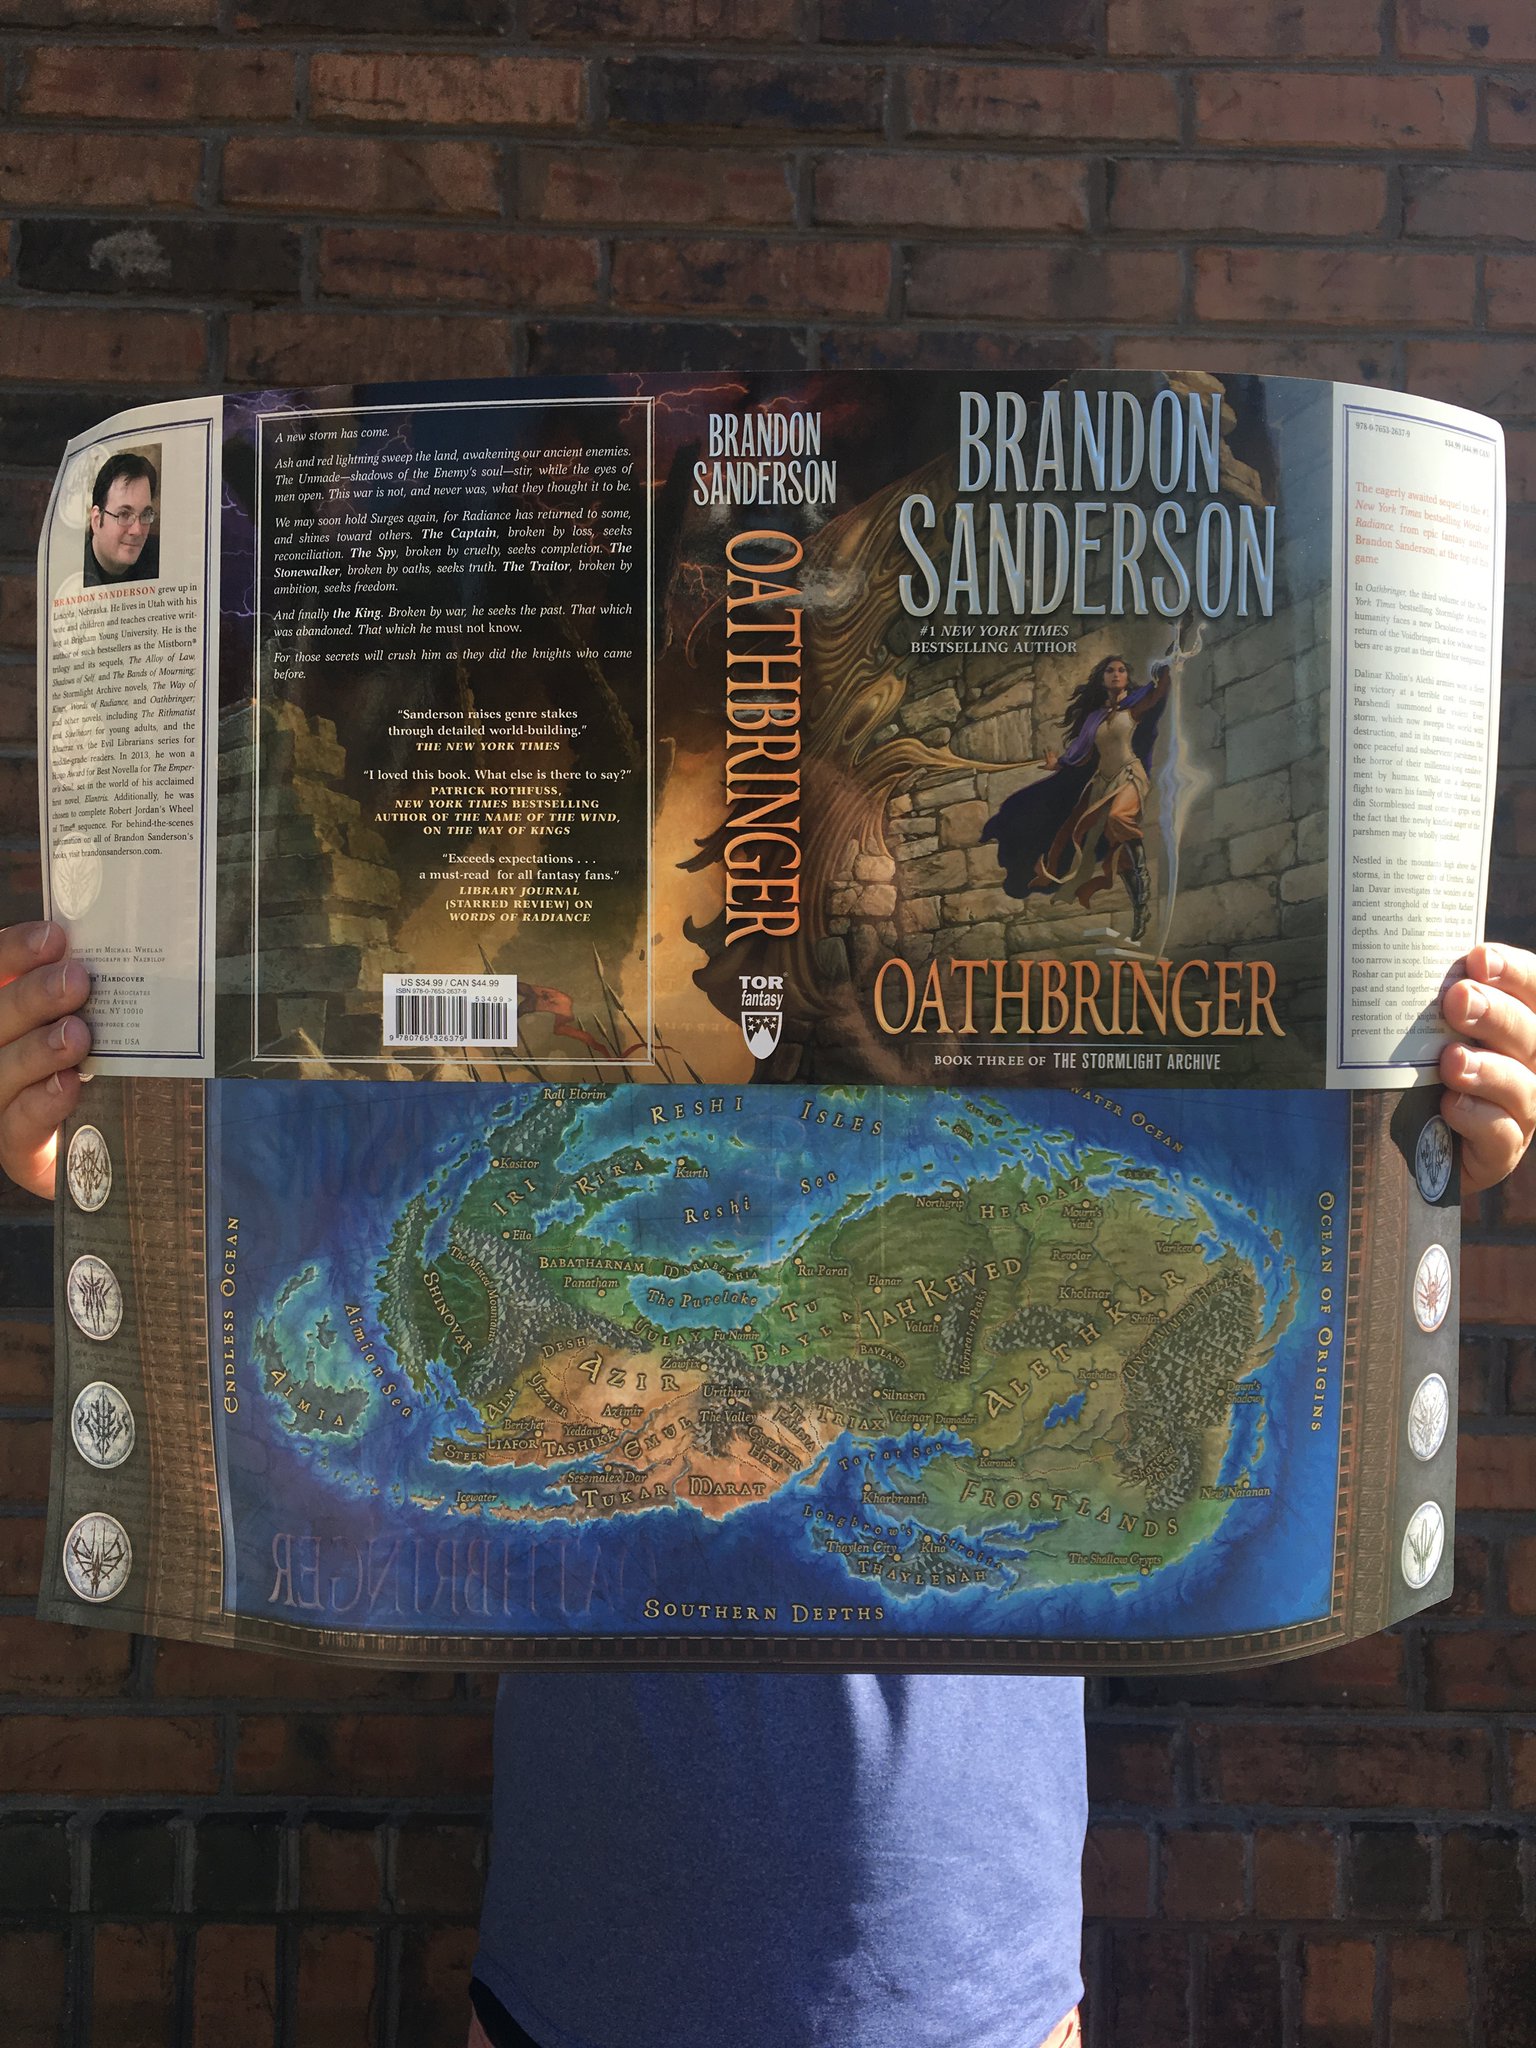 Ob Oathbringer Dust Jacket And Map Stormlight Archive 17th Shard The Official Brandon Sanderson Fansite